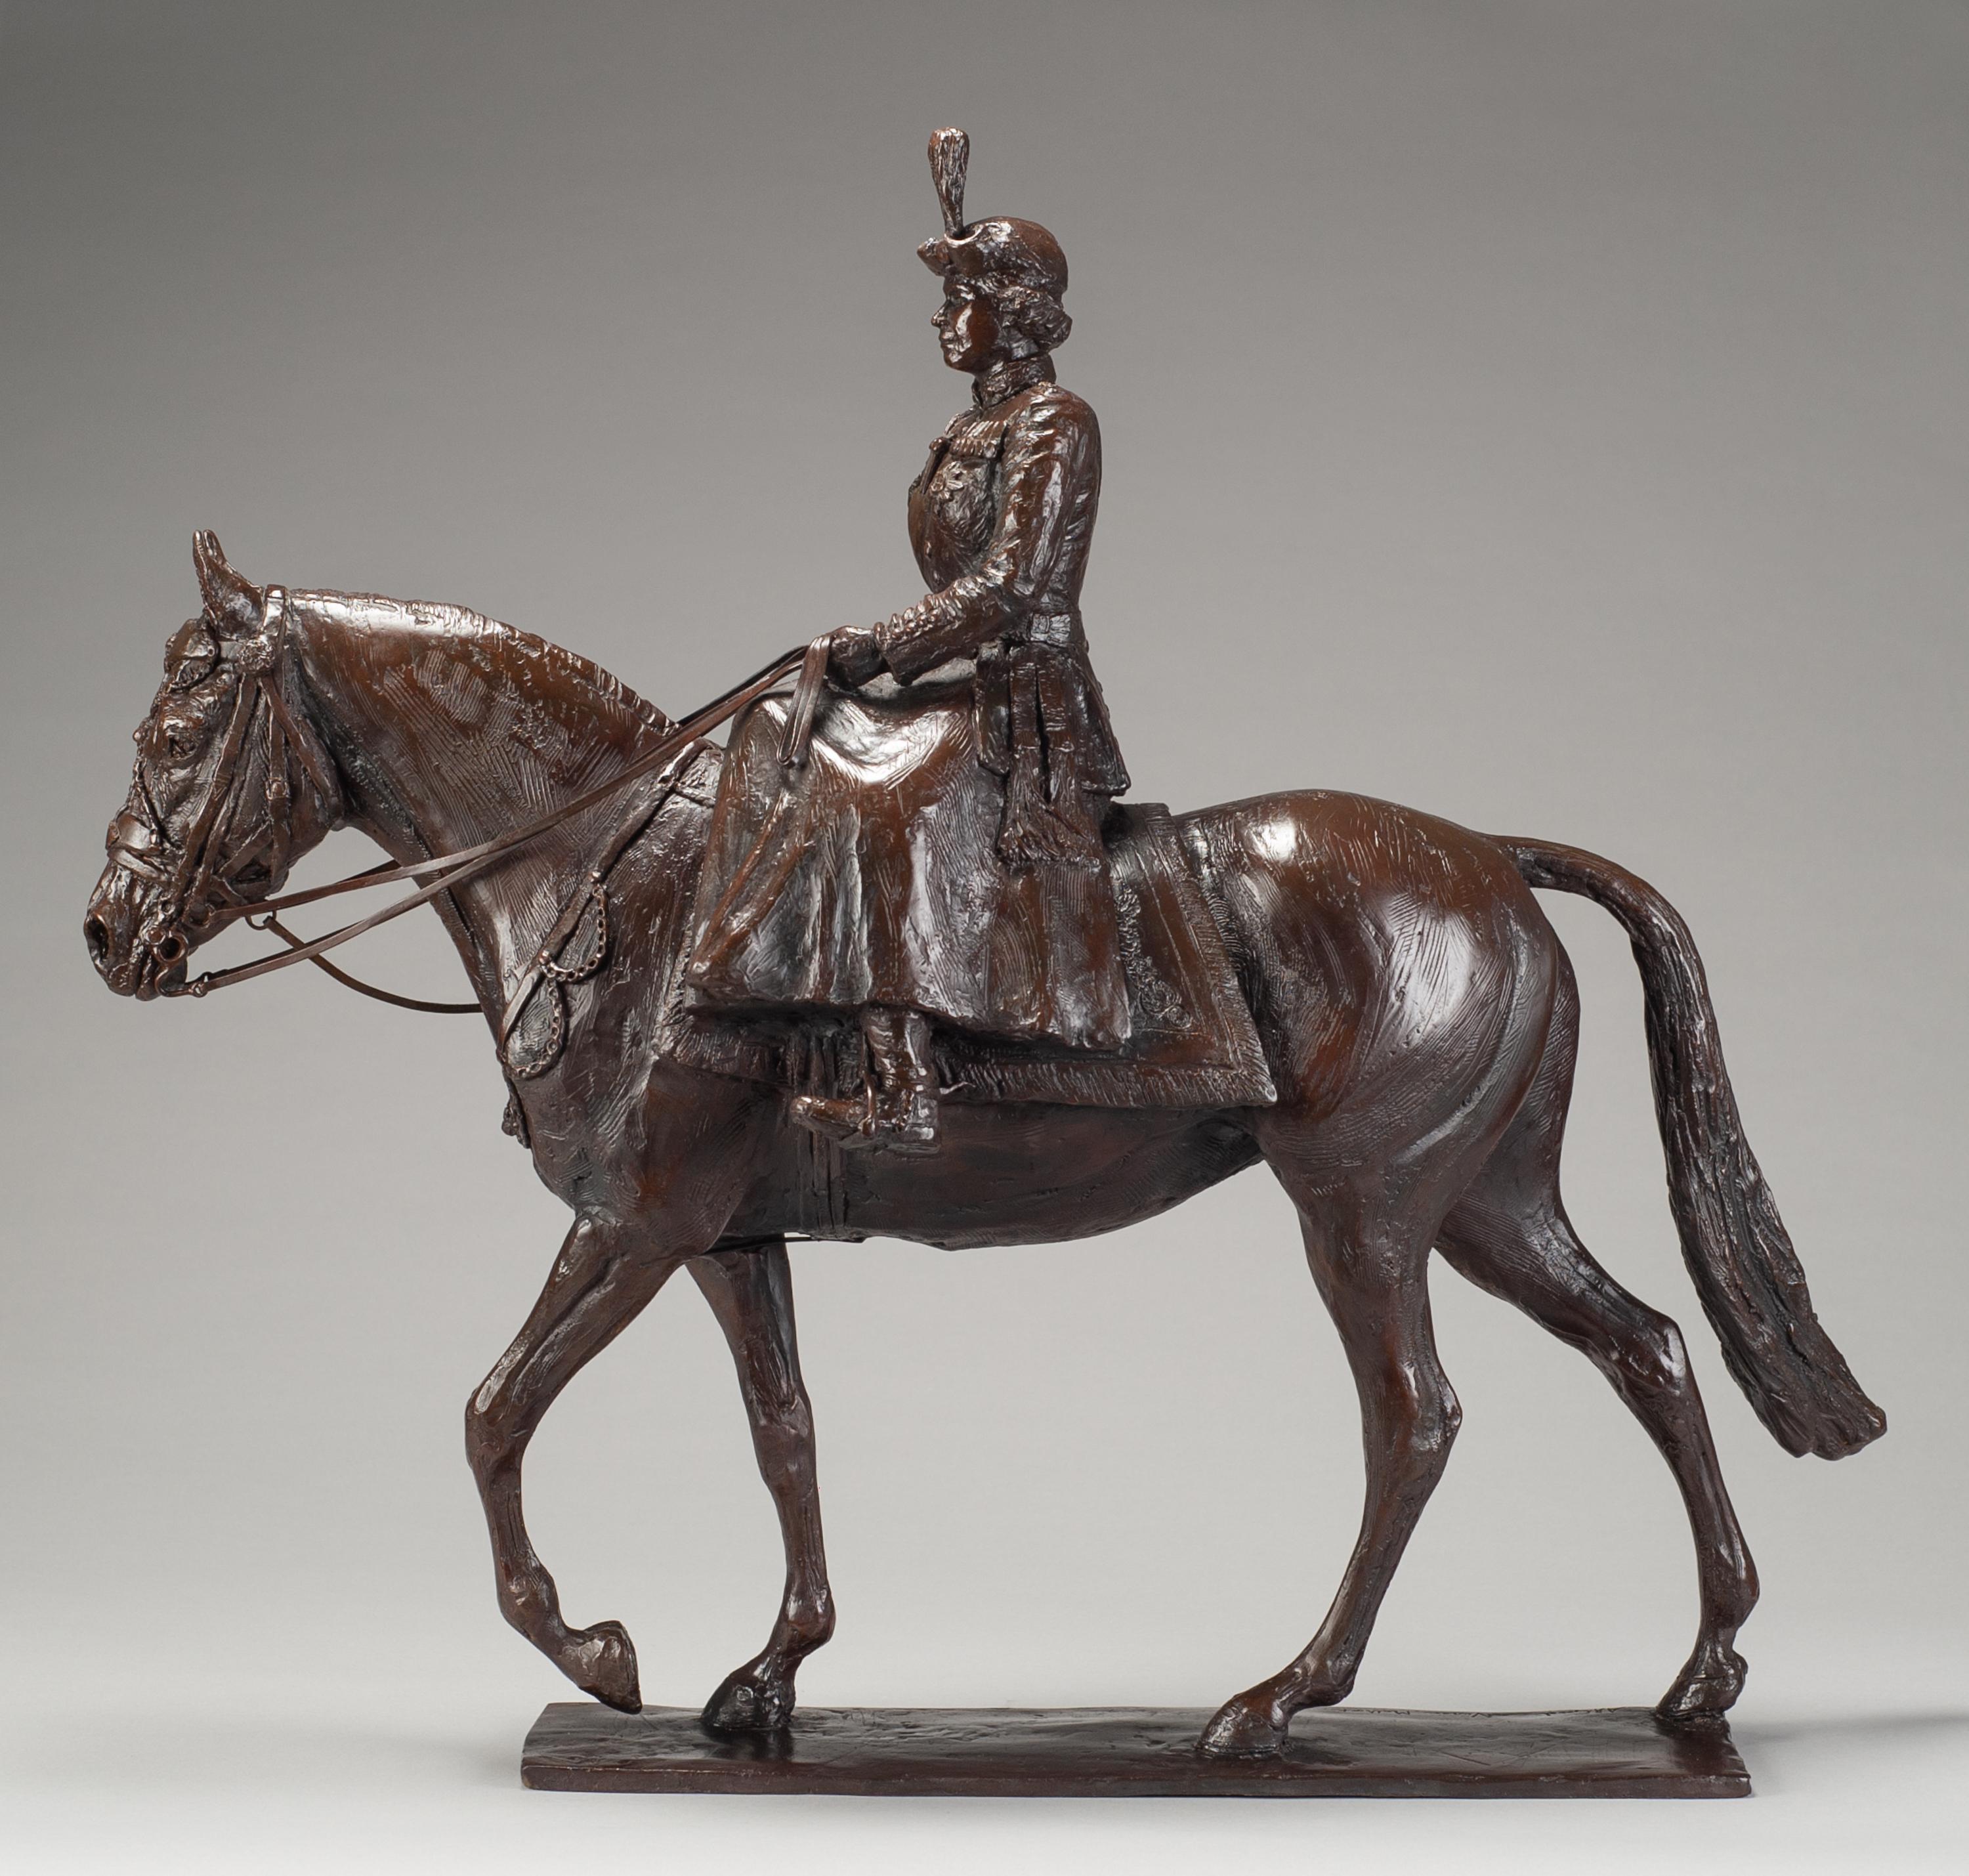 A bronze of Queen Elizabeth II Trooping the Colour by Amy Goodman and Vivien Mallock, 2022. This equestrian statuette was created for Queen Elizabeth II’s Platinum Jubilee.  Riding the famous mare Burmese, side saddle, she is shown as